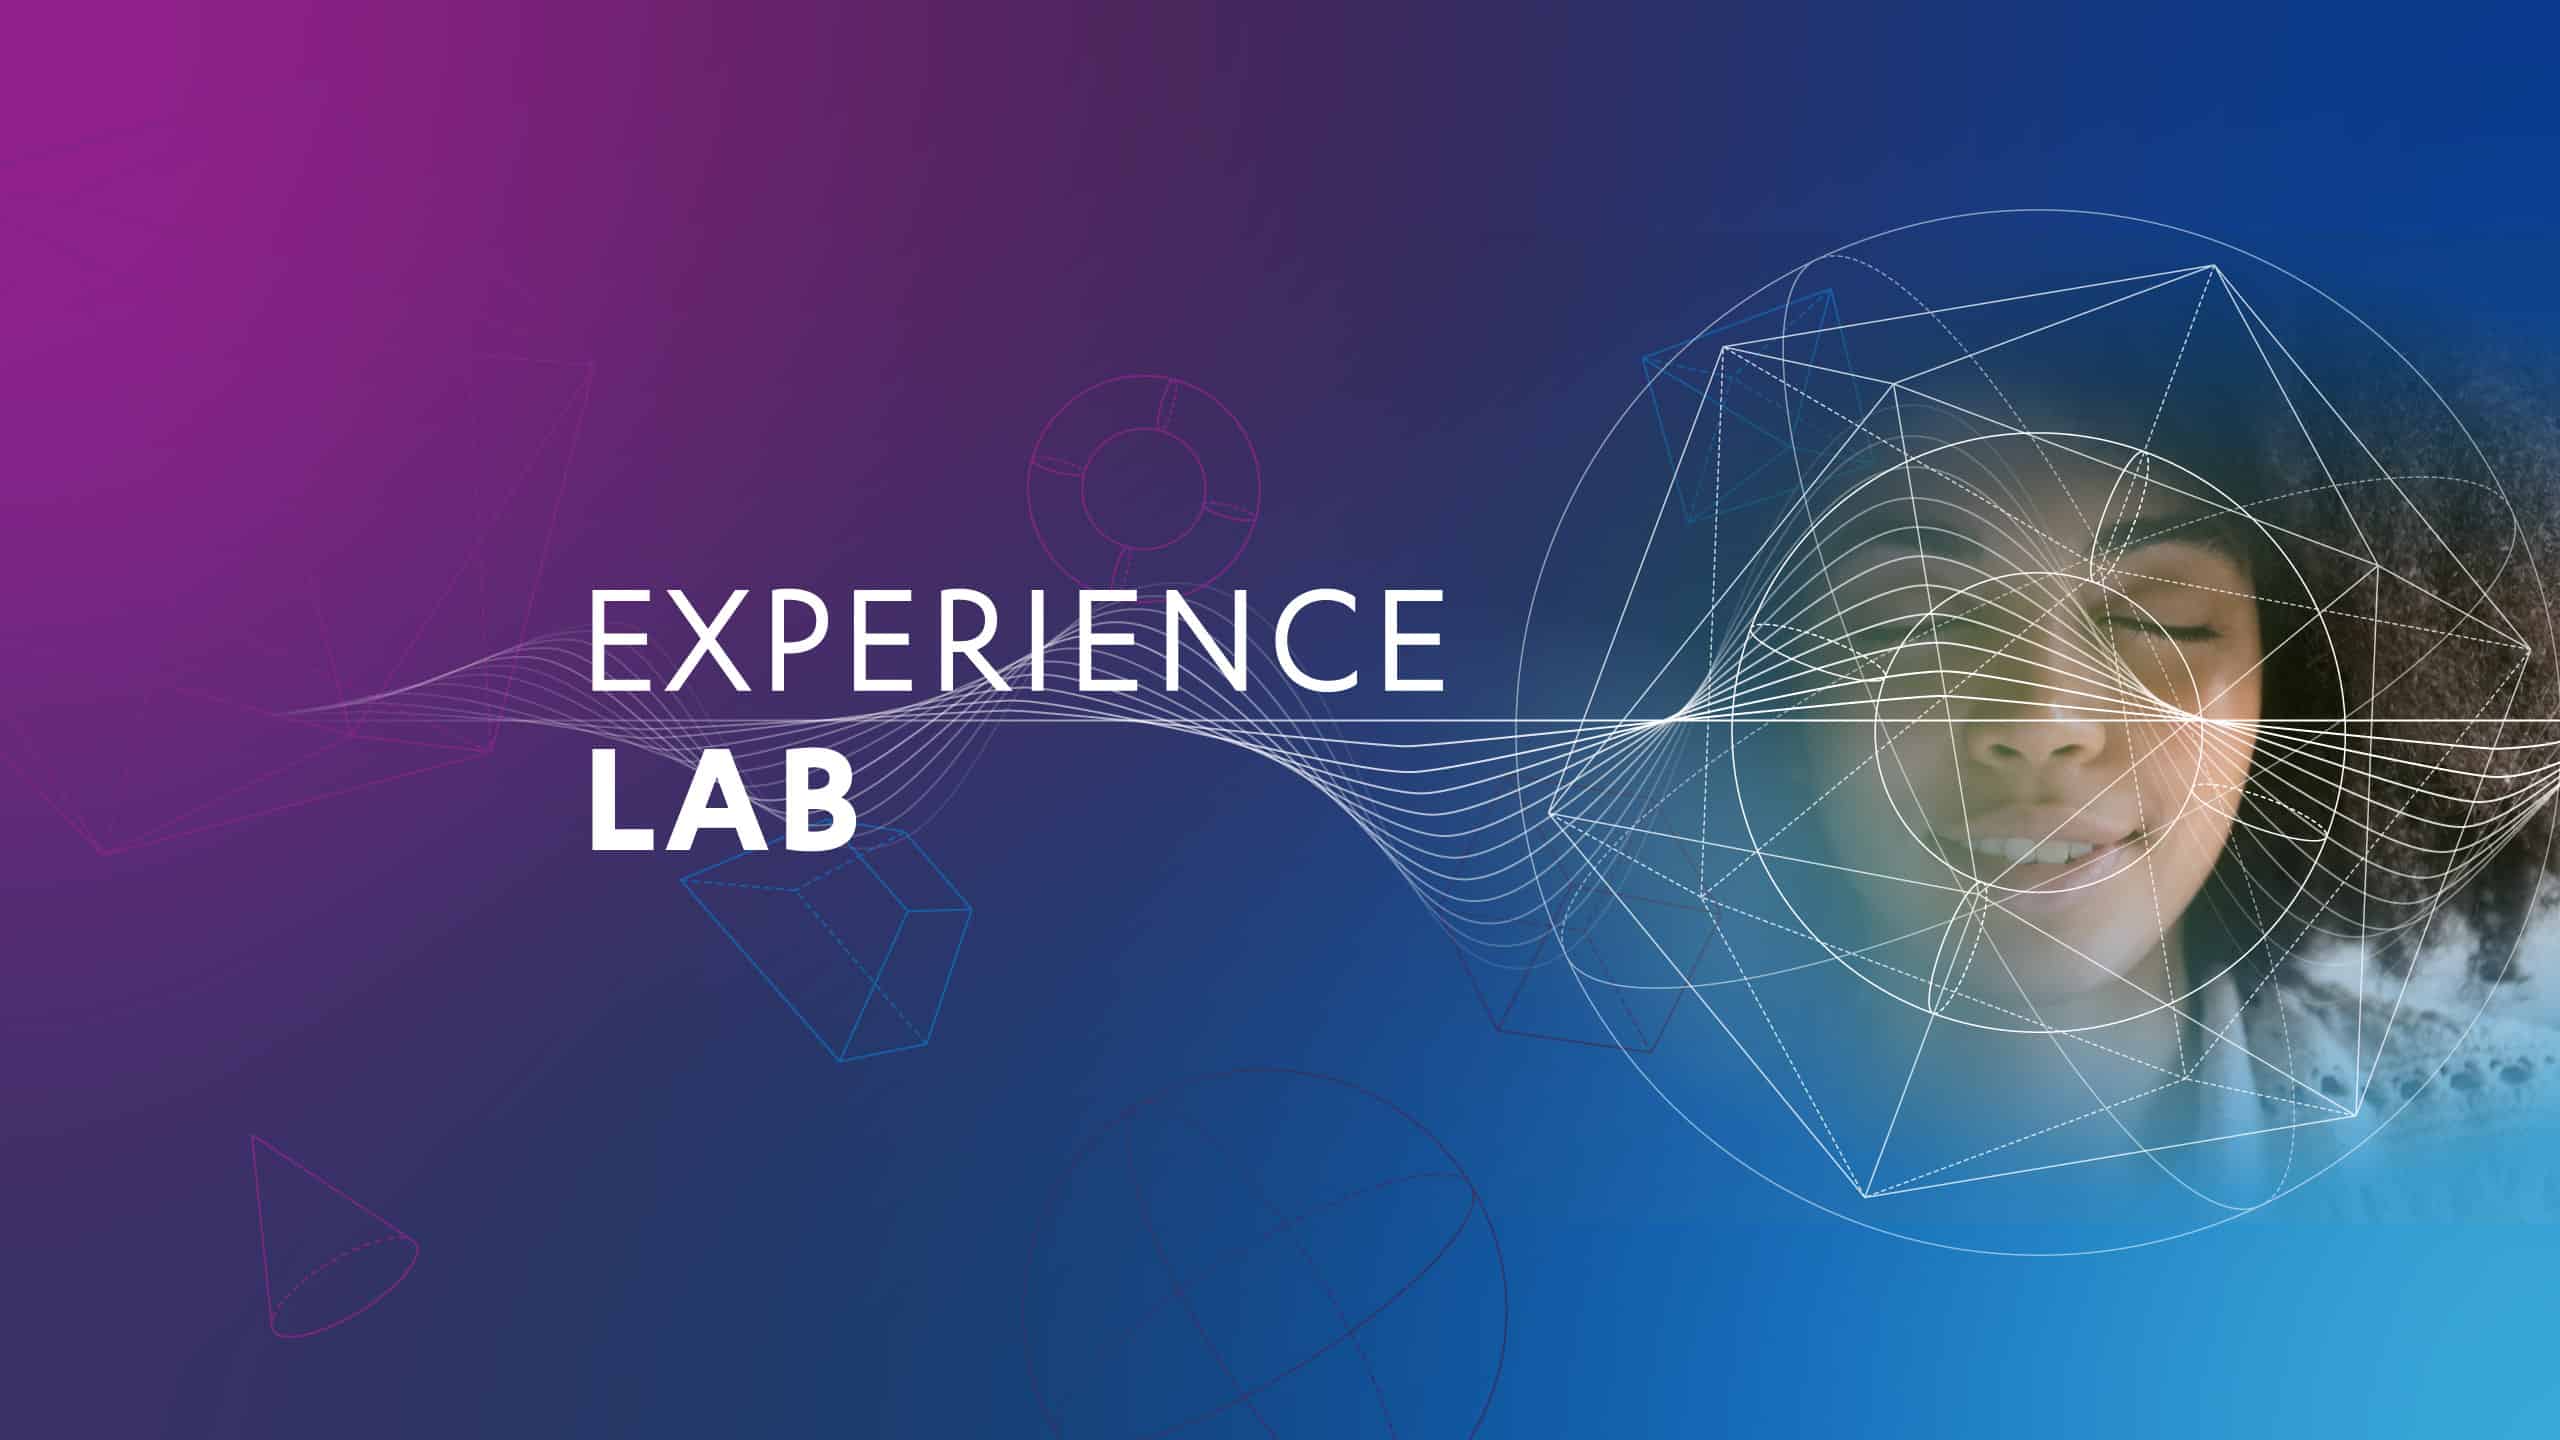 Experience Lab signing